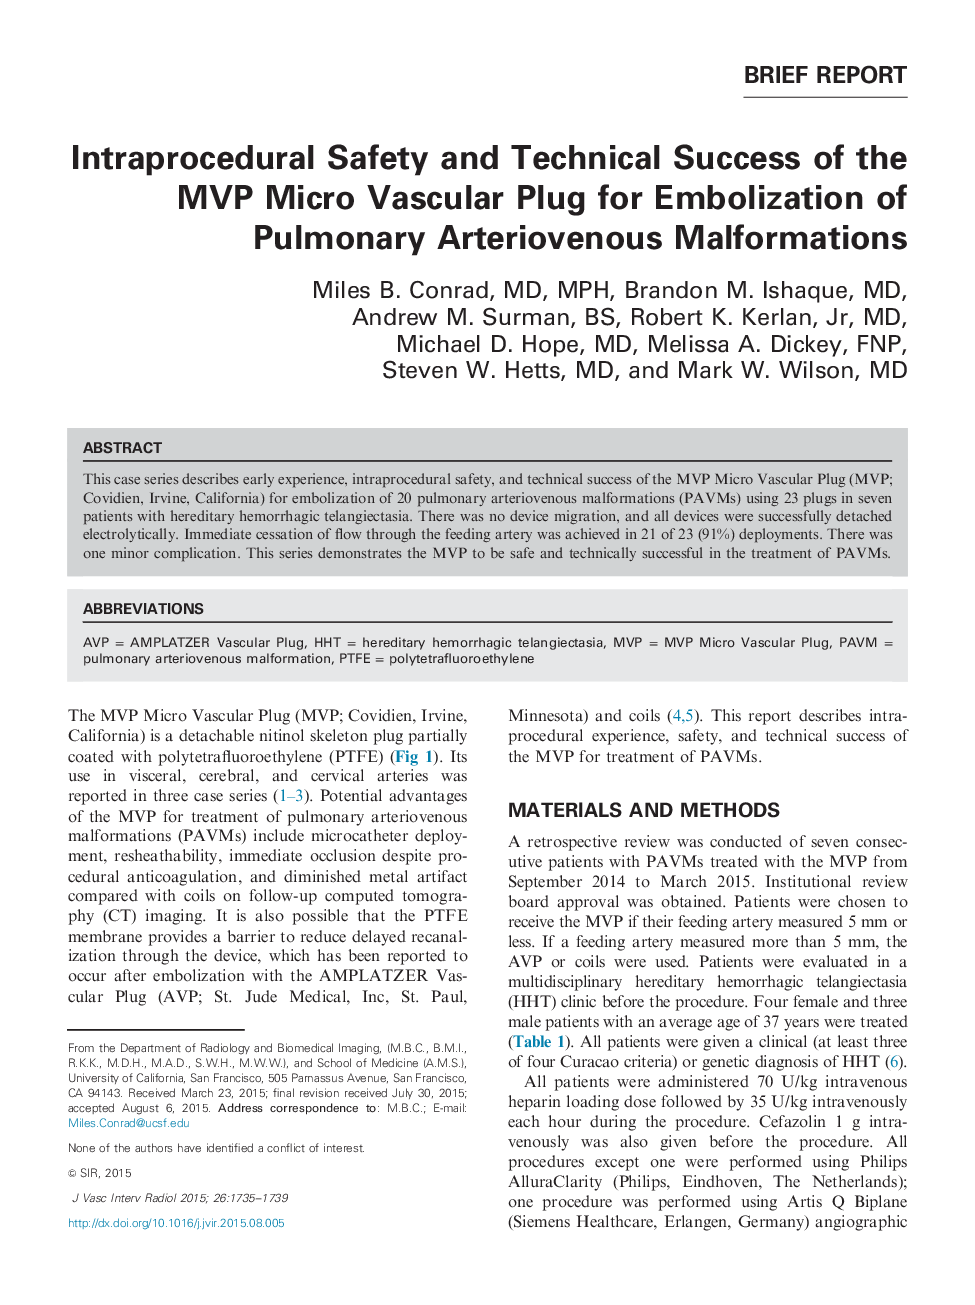 Intraprocedural Safety and Technical Success of the MVP Micro Vascular Plug for Embolization of Pulmonary Arteriovenous Malformations